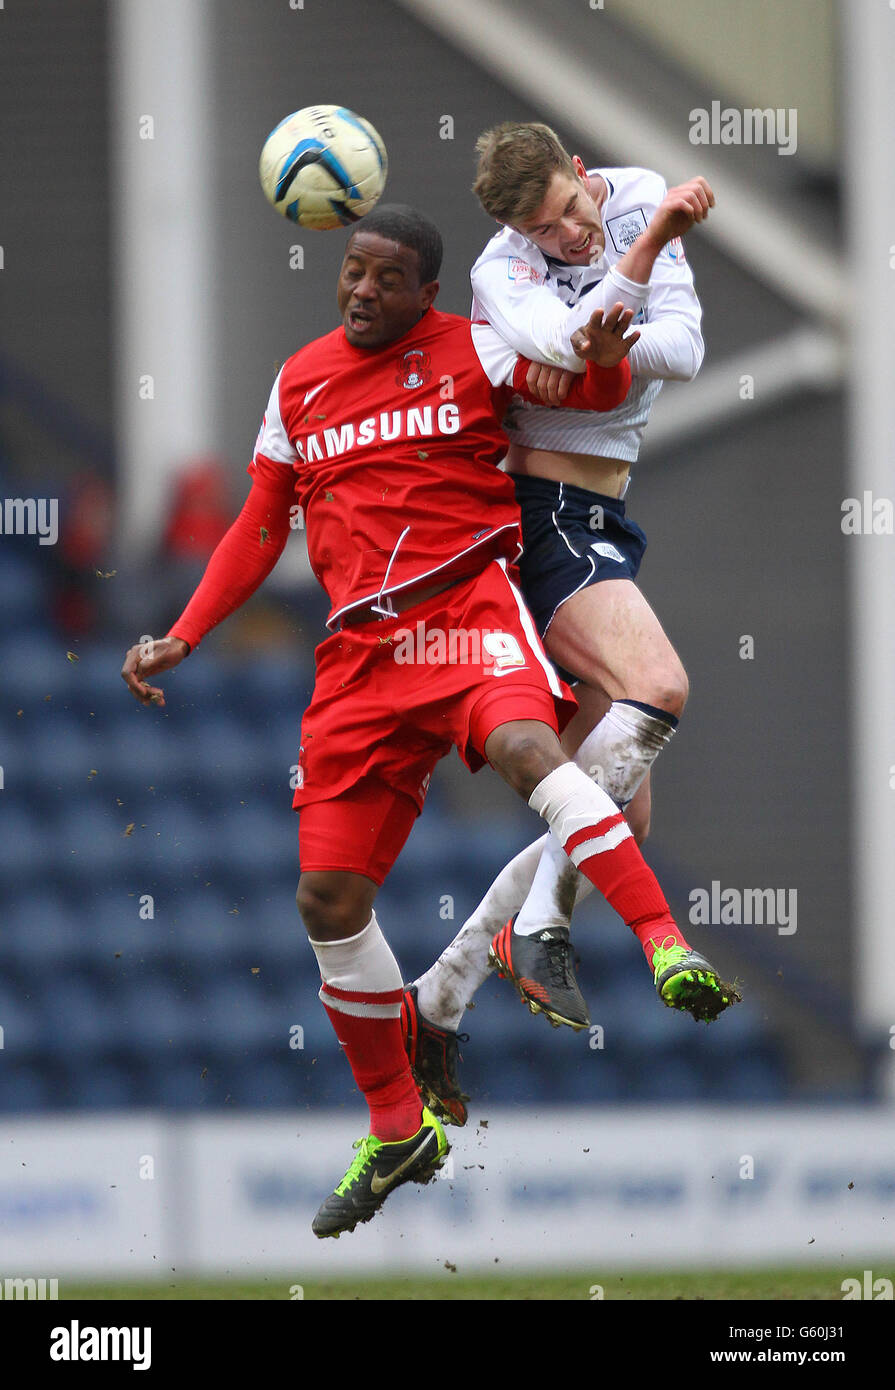 Preston North End's Paul Huntington (right) and Leyton Orient's Kevin Lisbie (left) battle for the ball in the air Stock Photo